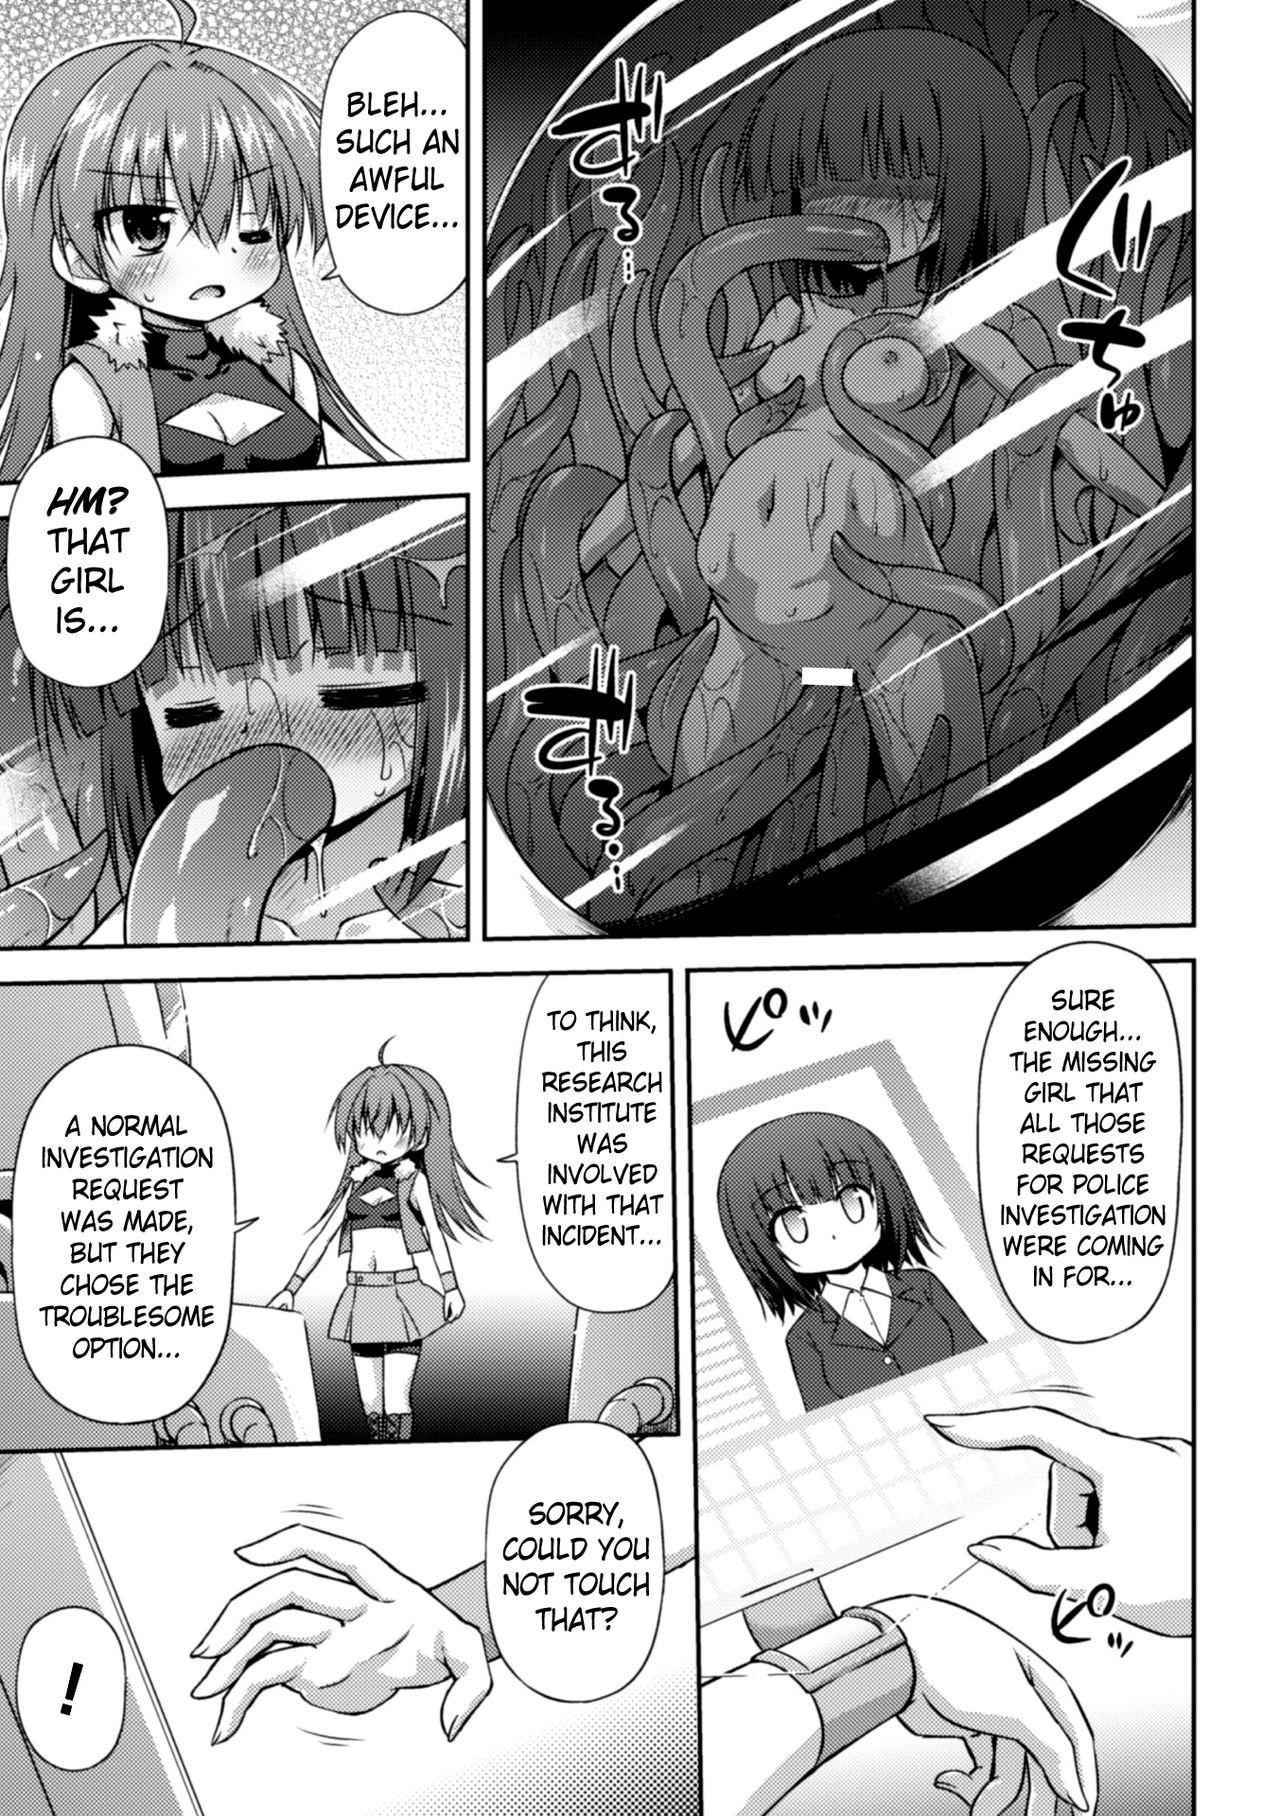 Foot Konoyo wa Subete Tentacle! | This World is all Tentacles! Black Girl - Page 7